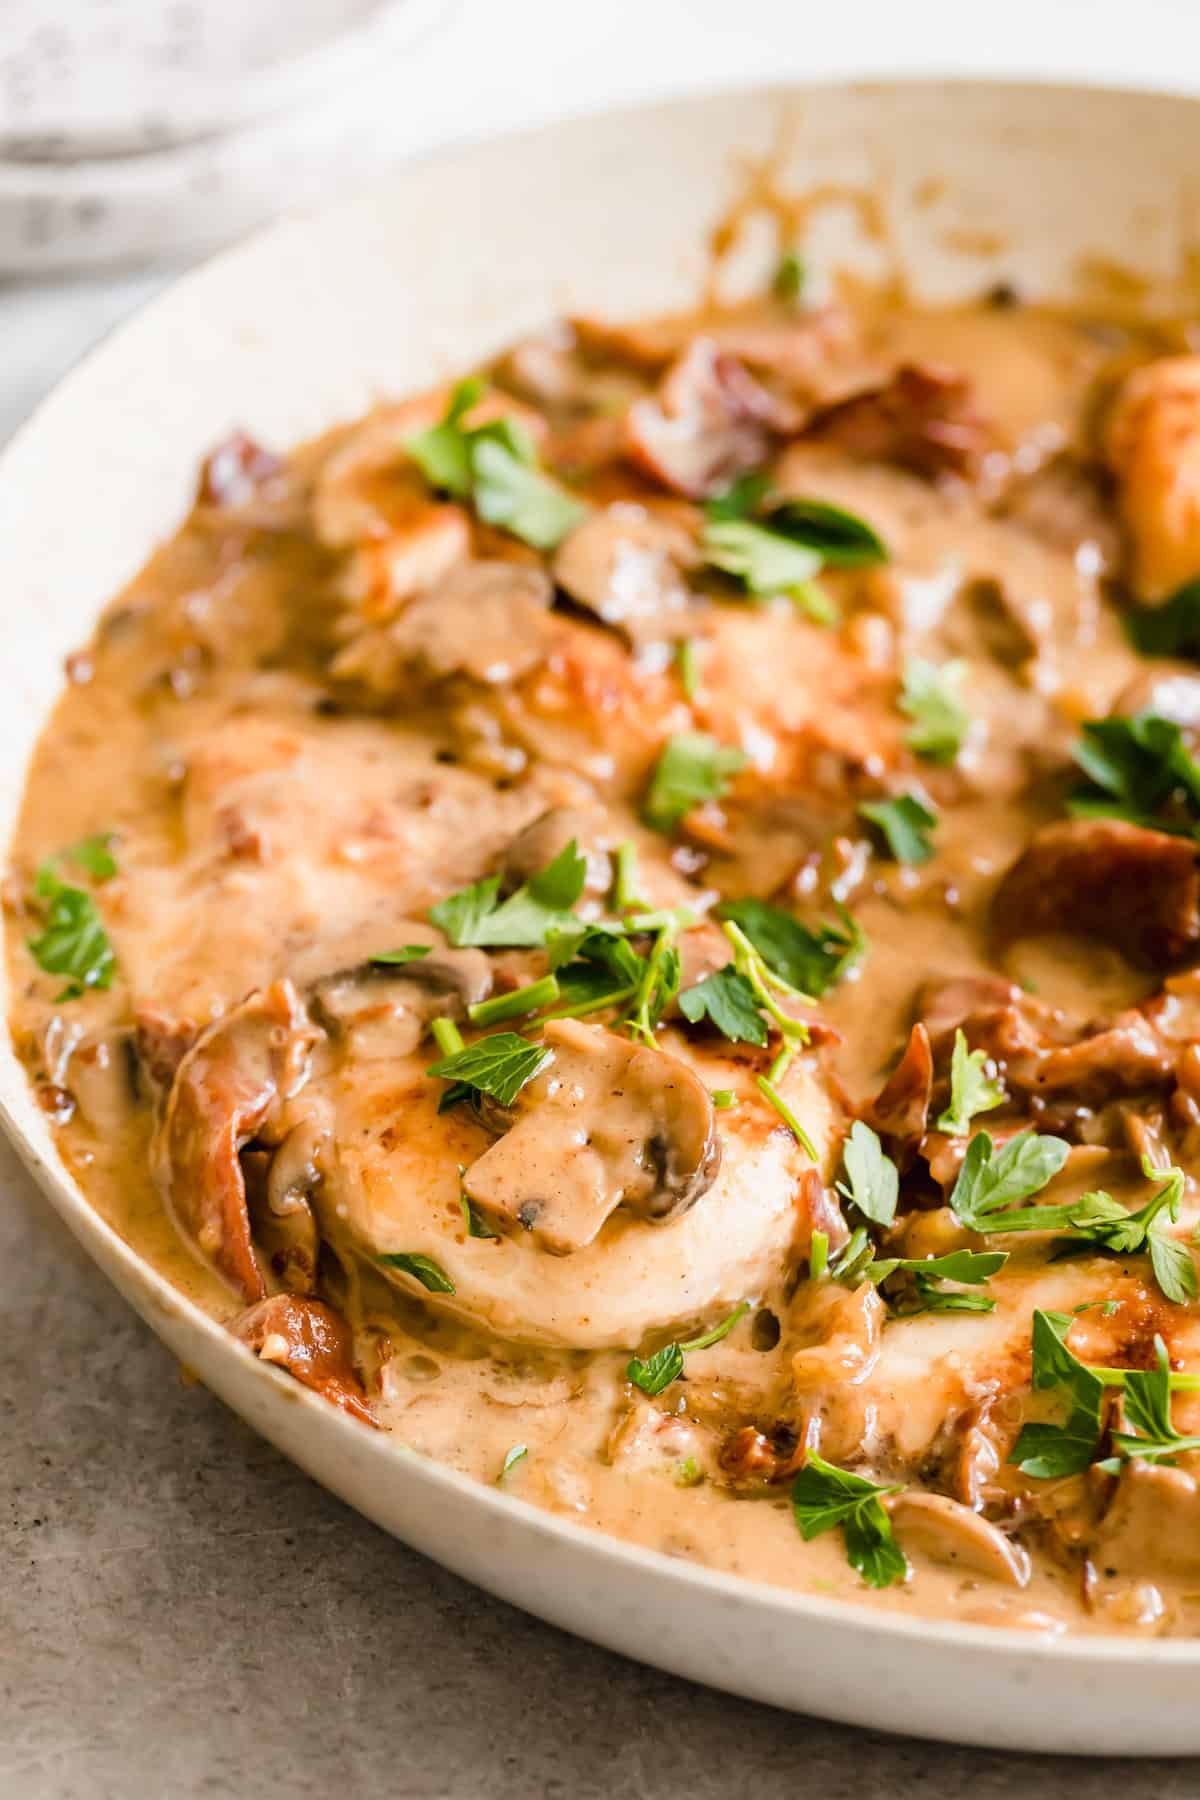 Chicken in a creamy sauce with sliced mushrooms and fresh herbs.